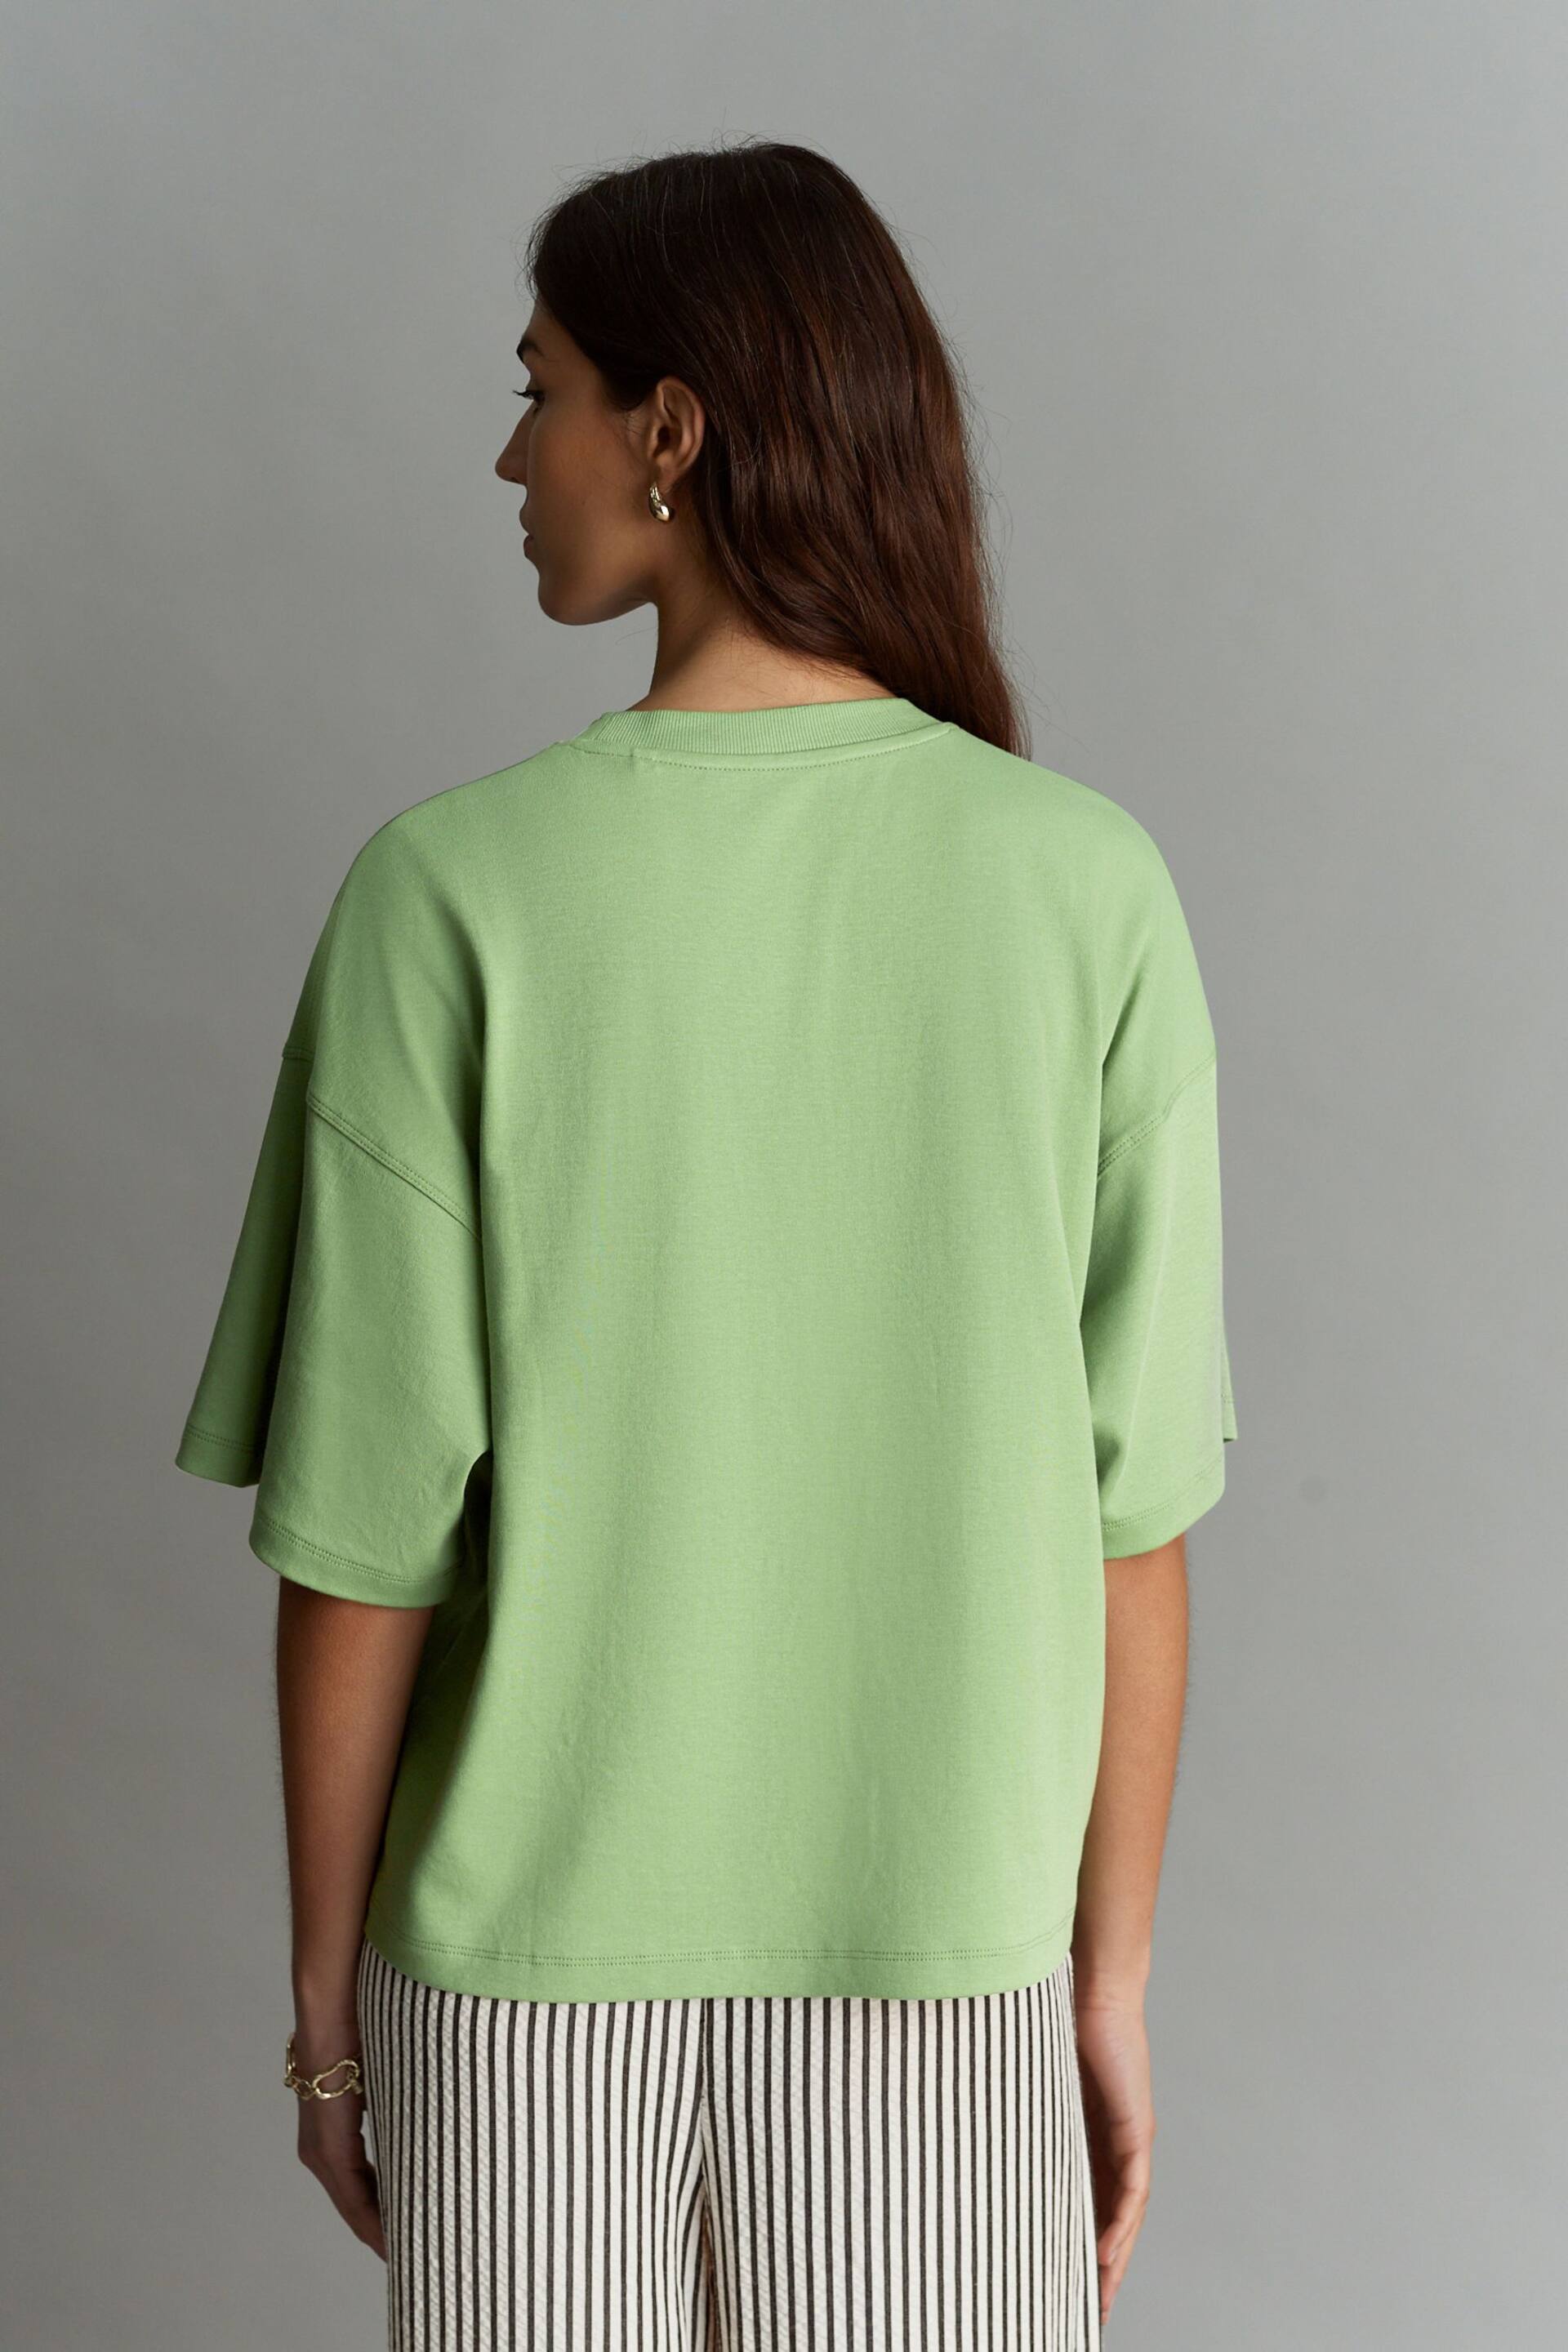 Matcha Green 100% Cotton Heavyweight Relaxed Fit Crew Neck T-Shirt - Image 4 of 7